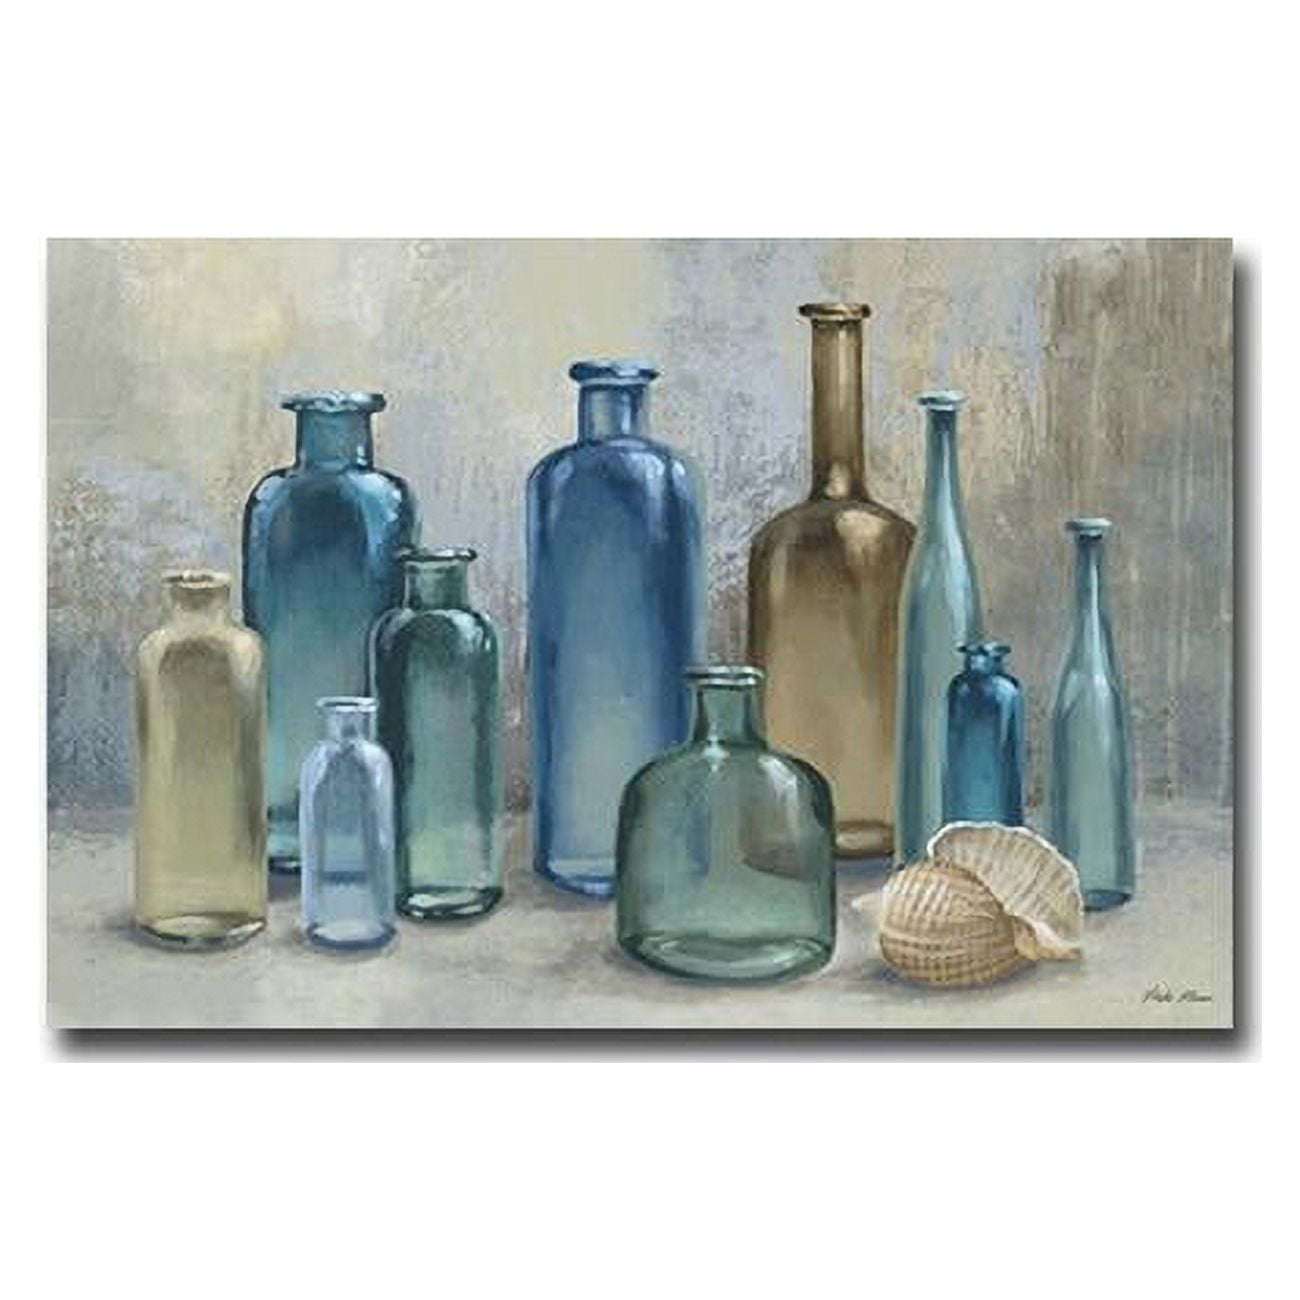 1218am992sg Glass Bottles By Michael Marcon Premium Gallery Wrapped Canvas Giclee Art - 12 X 18 X 1.5 In.